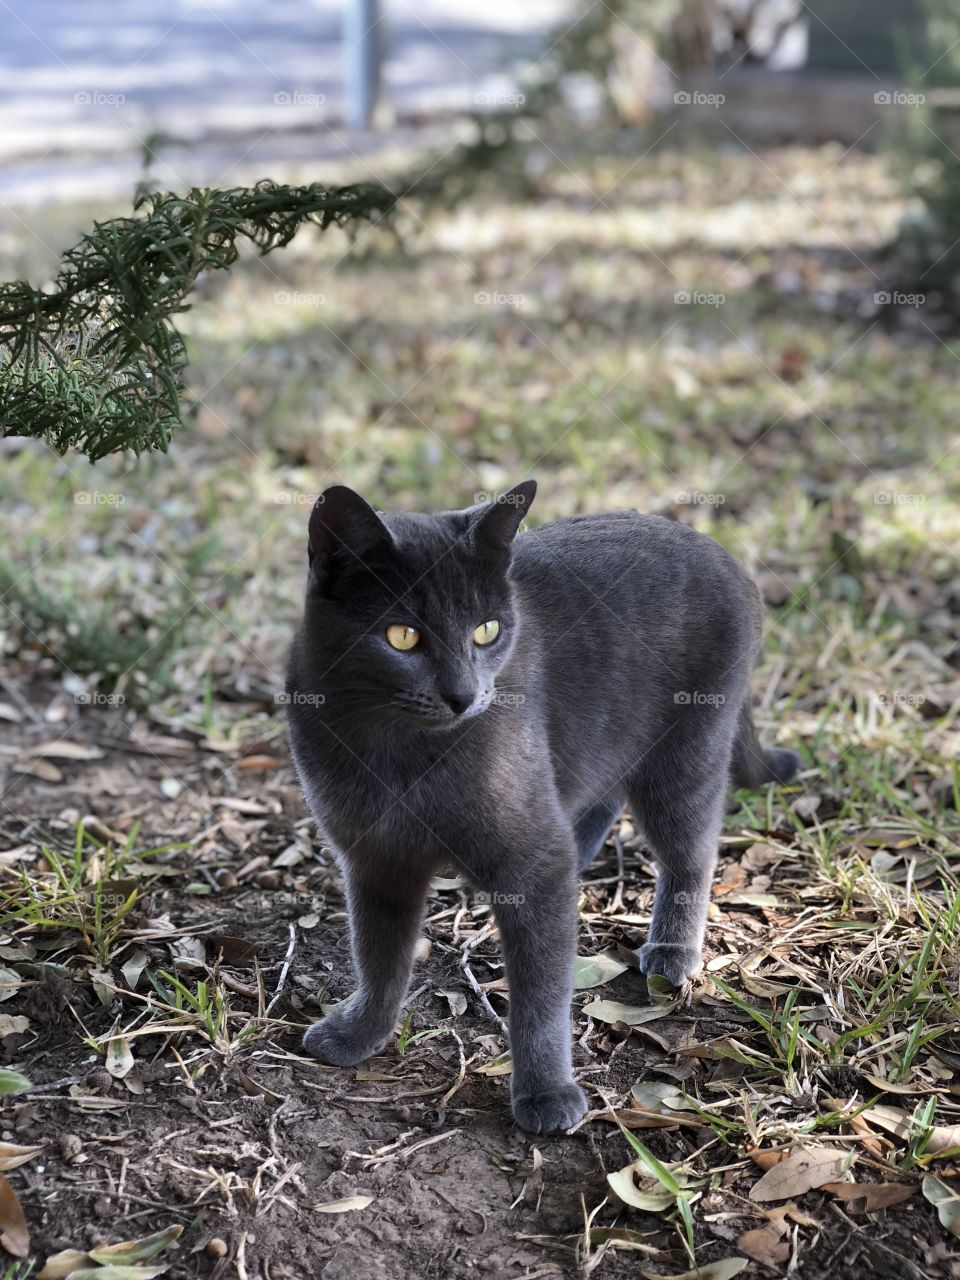 Pepper, the Chartreux cat, posing as a panther.